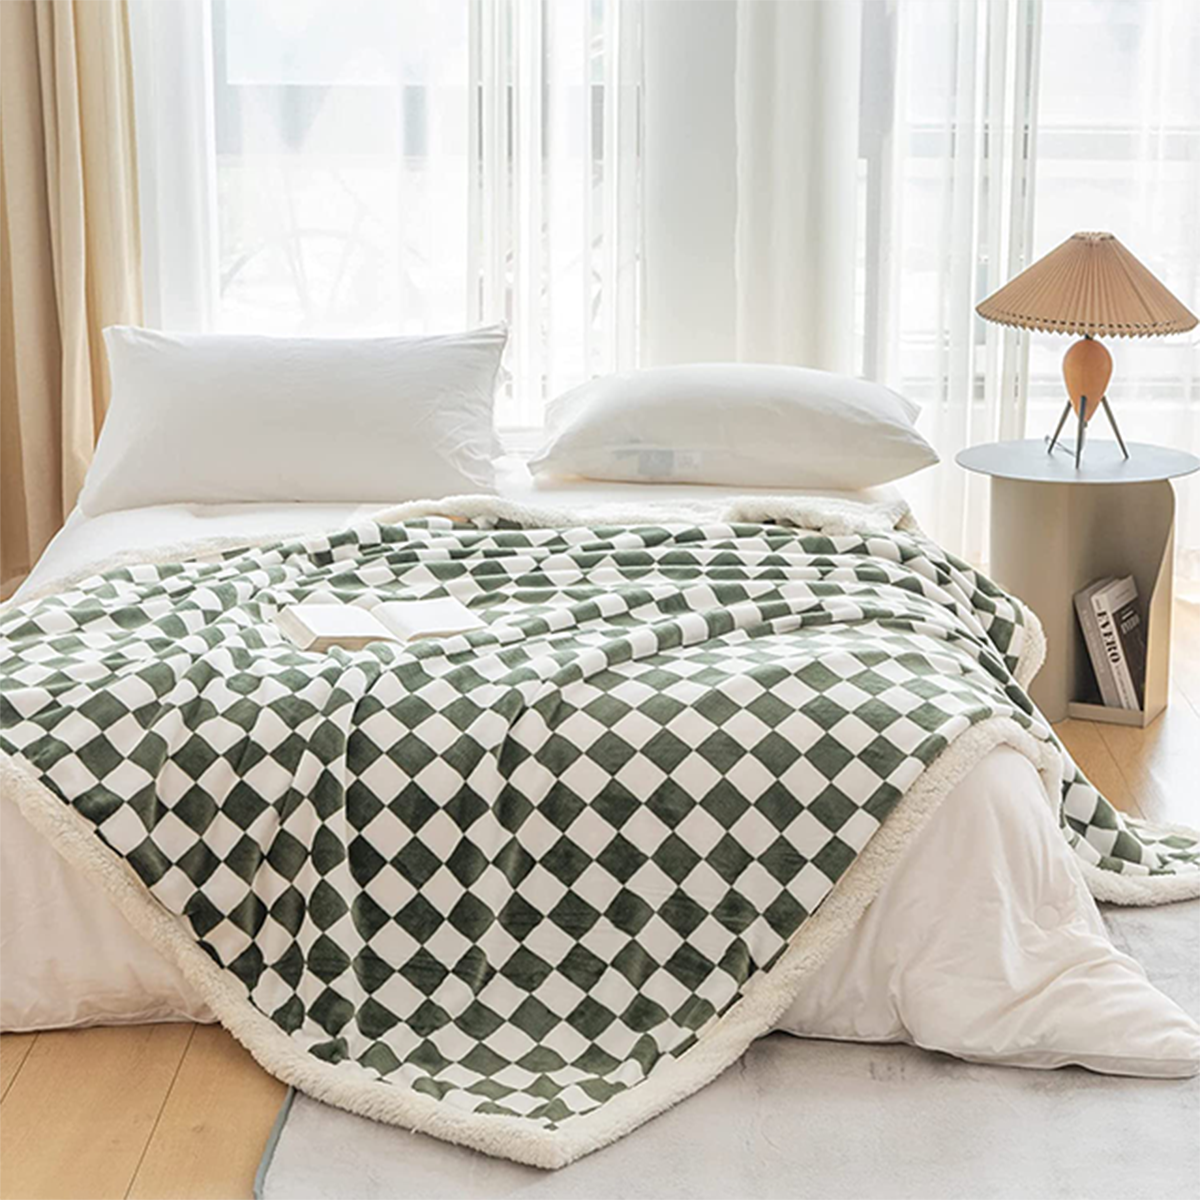 The Trendiest Affordable Throw Blankets From Amazon for Every Home Decor Aesthetic – E! Online